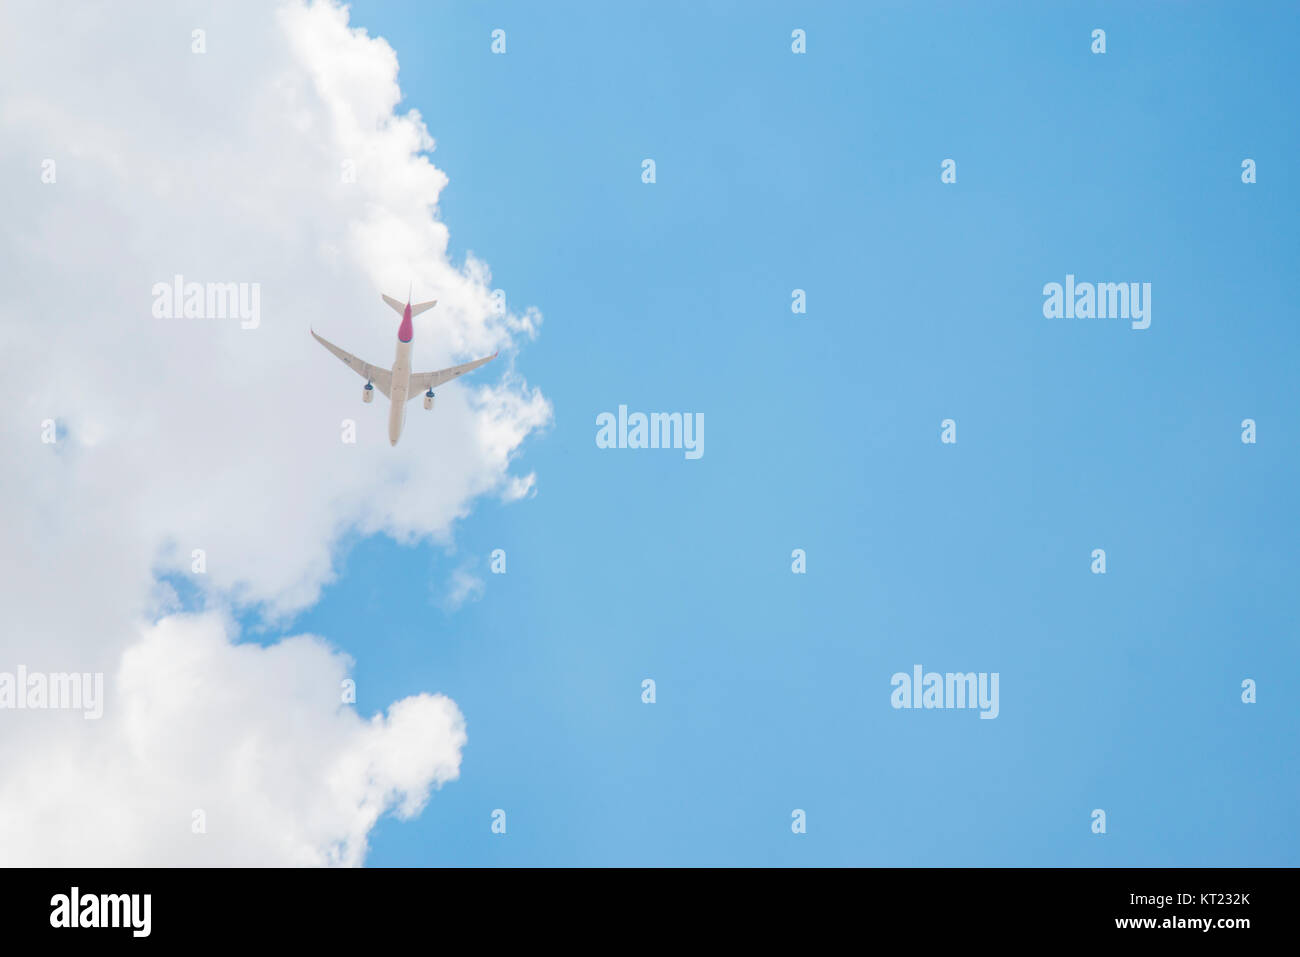 Plane flying and cloudy sky. Stock Photo